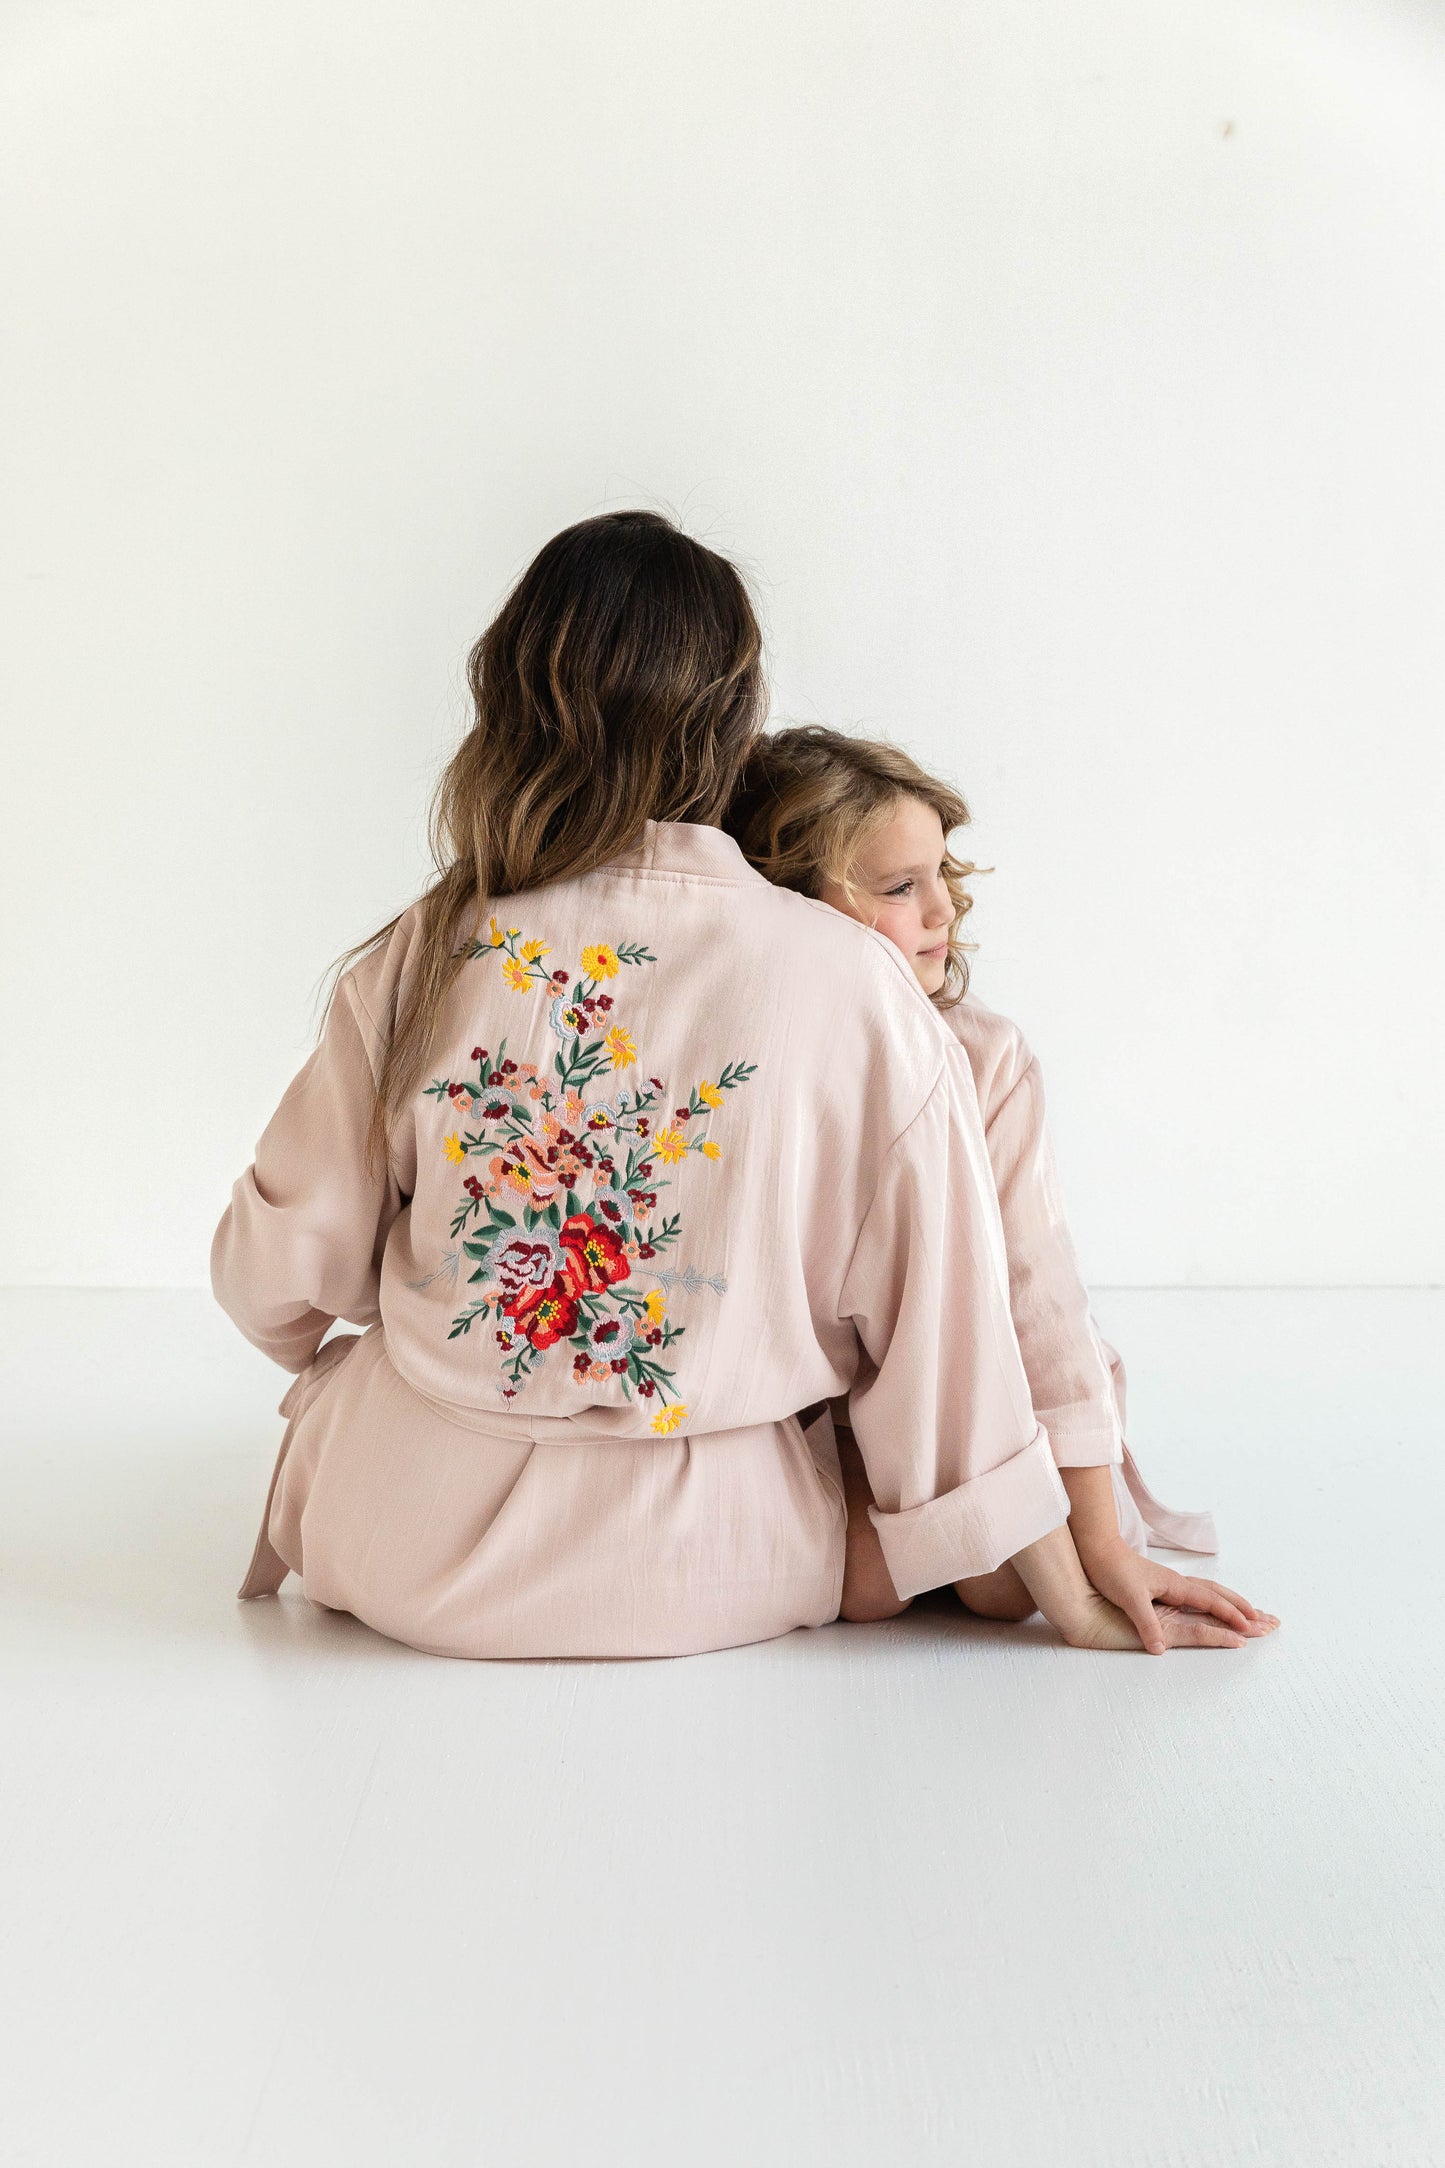 Woman wearing  Hammam34 Pink Floral Embroidered Kimono and  sitting on the floor and her daughter wearing a pink floral embroidered kids kimono sitting with her